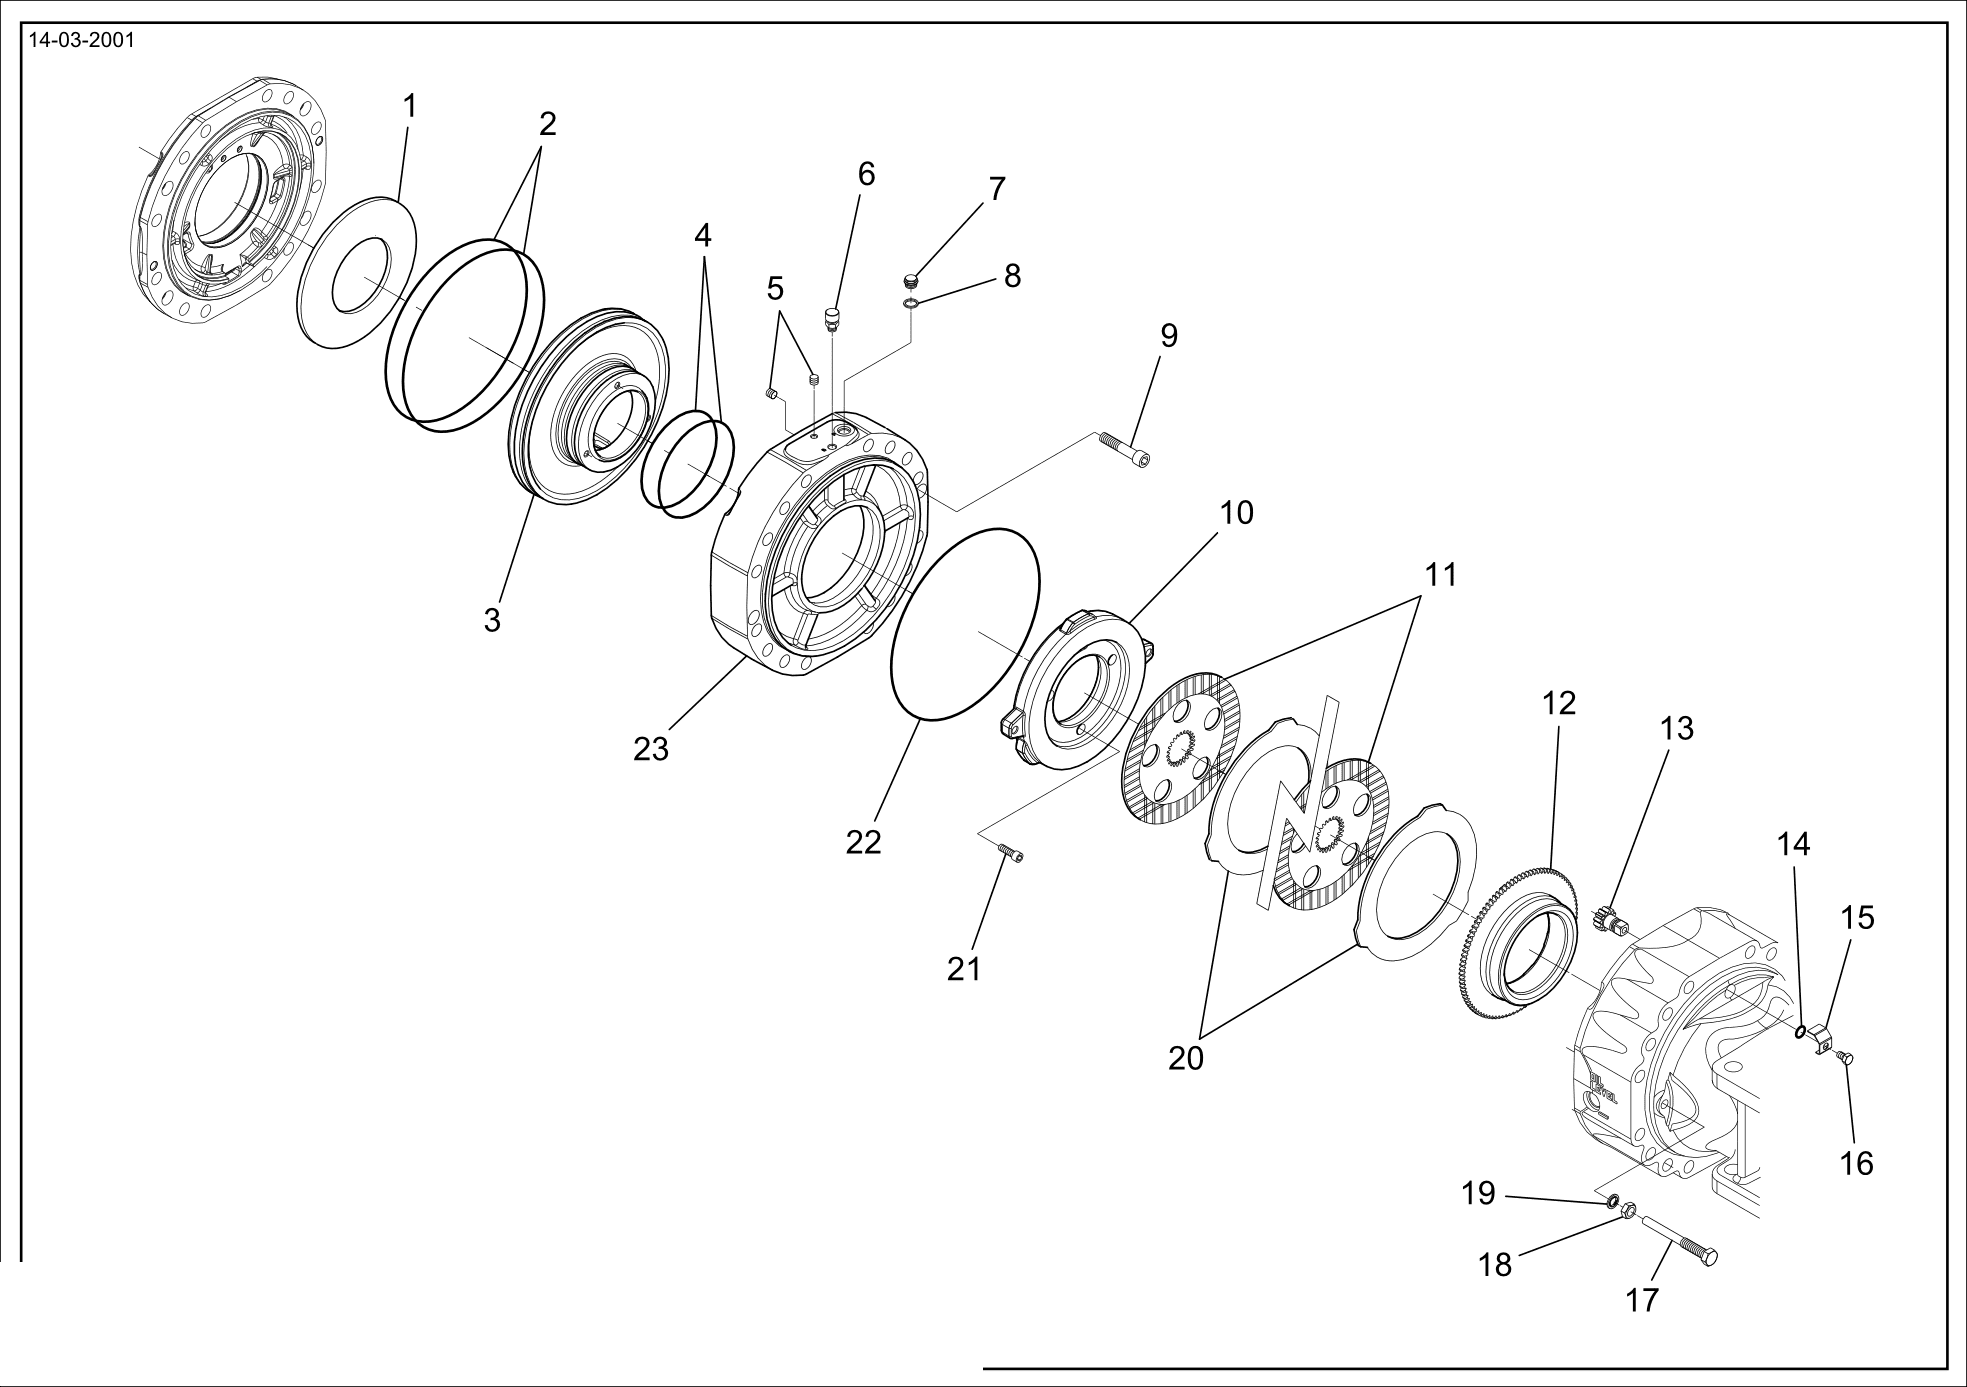 drawing for XTREME MANUFACTURING 14106-020 - INTERMEDIATE BRAKE DISC (figure 3)